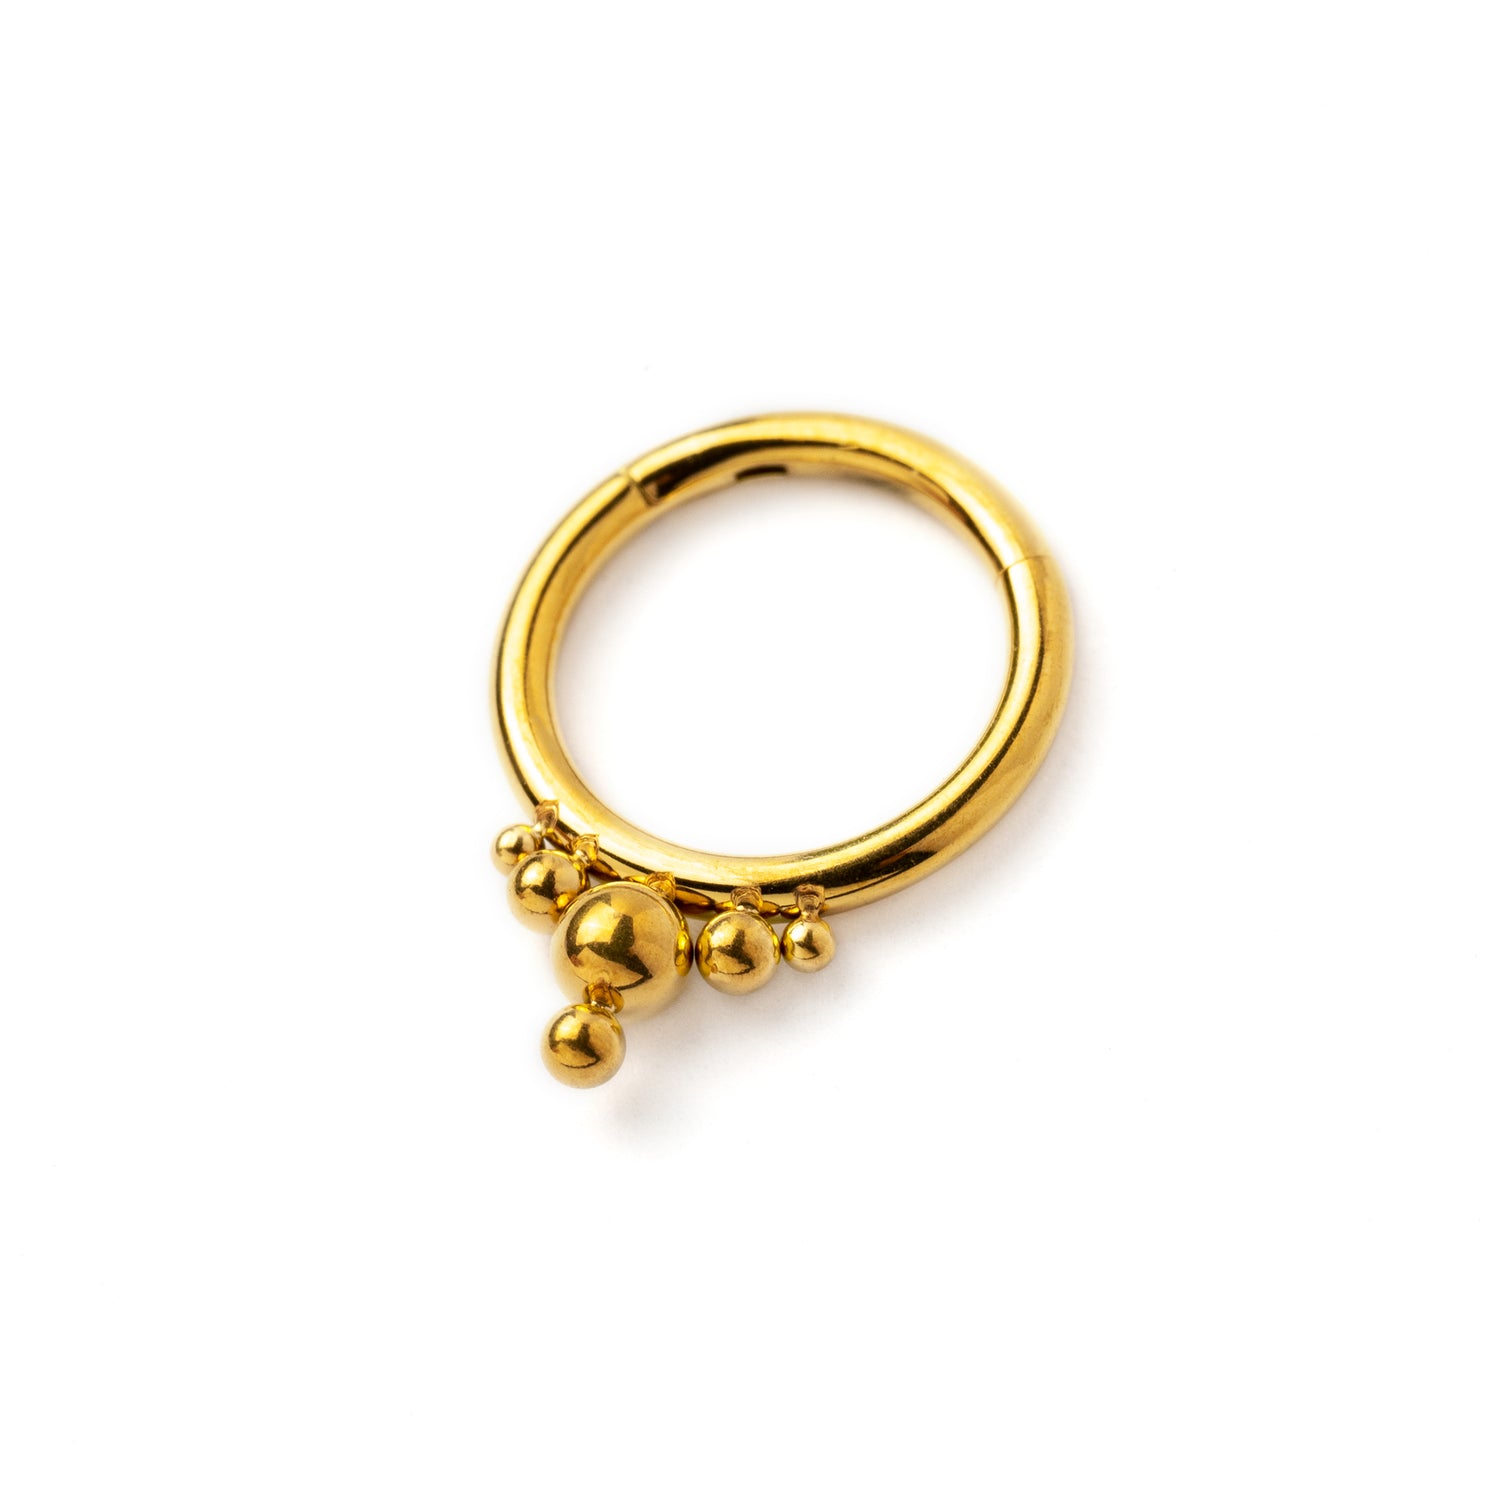 Golden surgical steel Malee septum clicker right side view